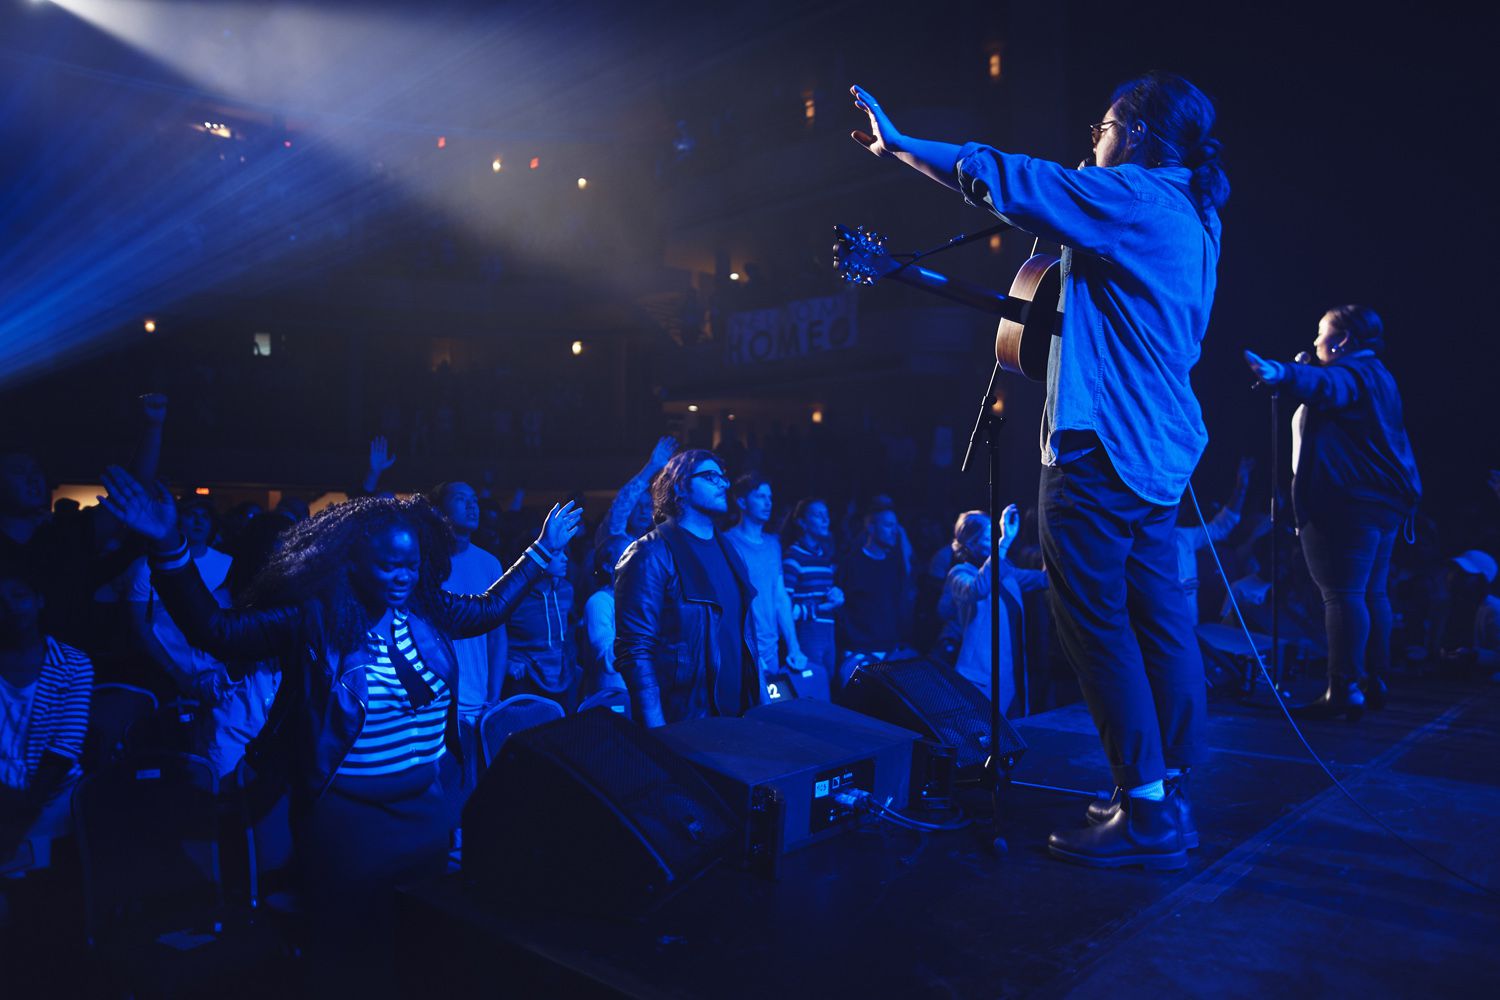 people pray during a service at Hillsong Church in New York